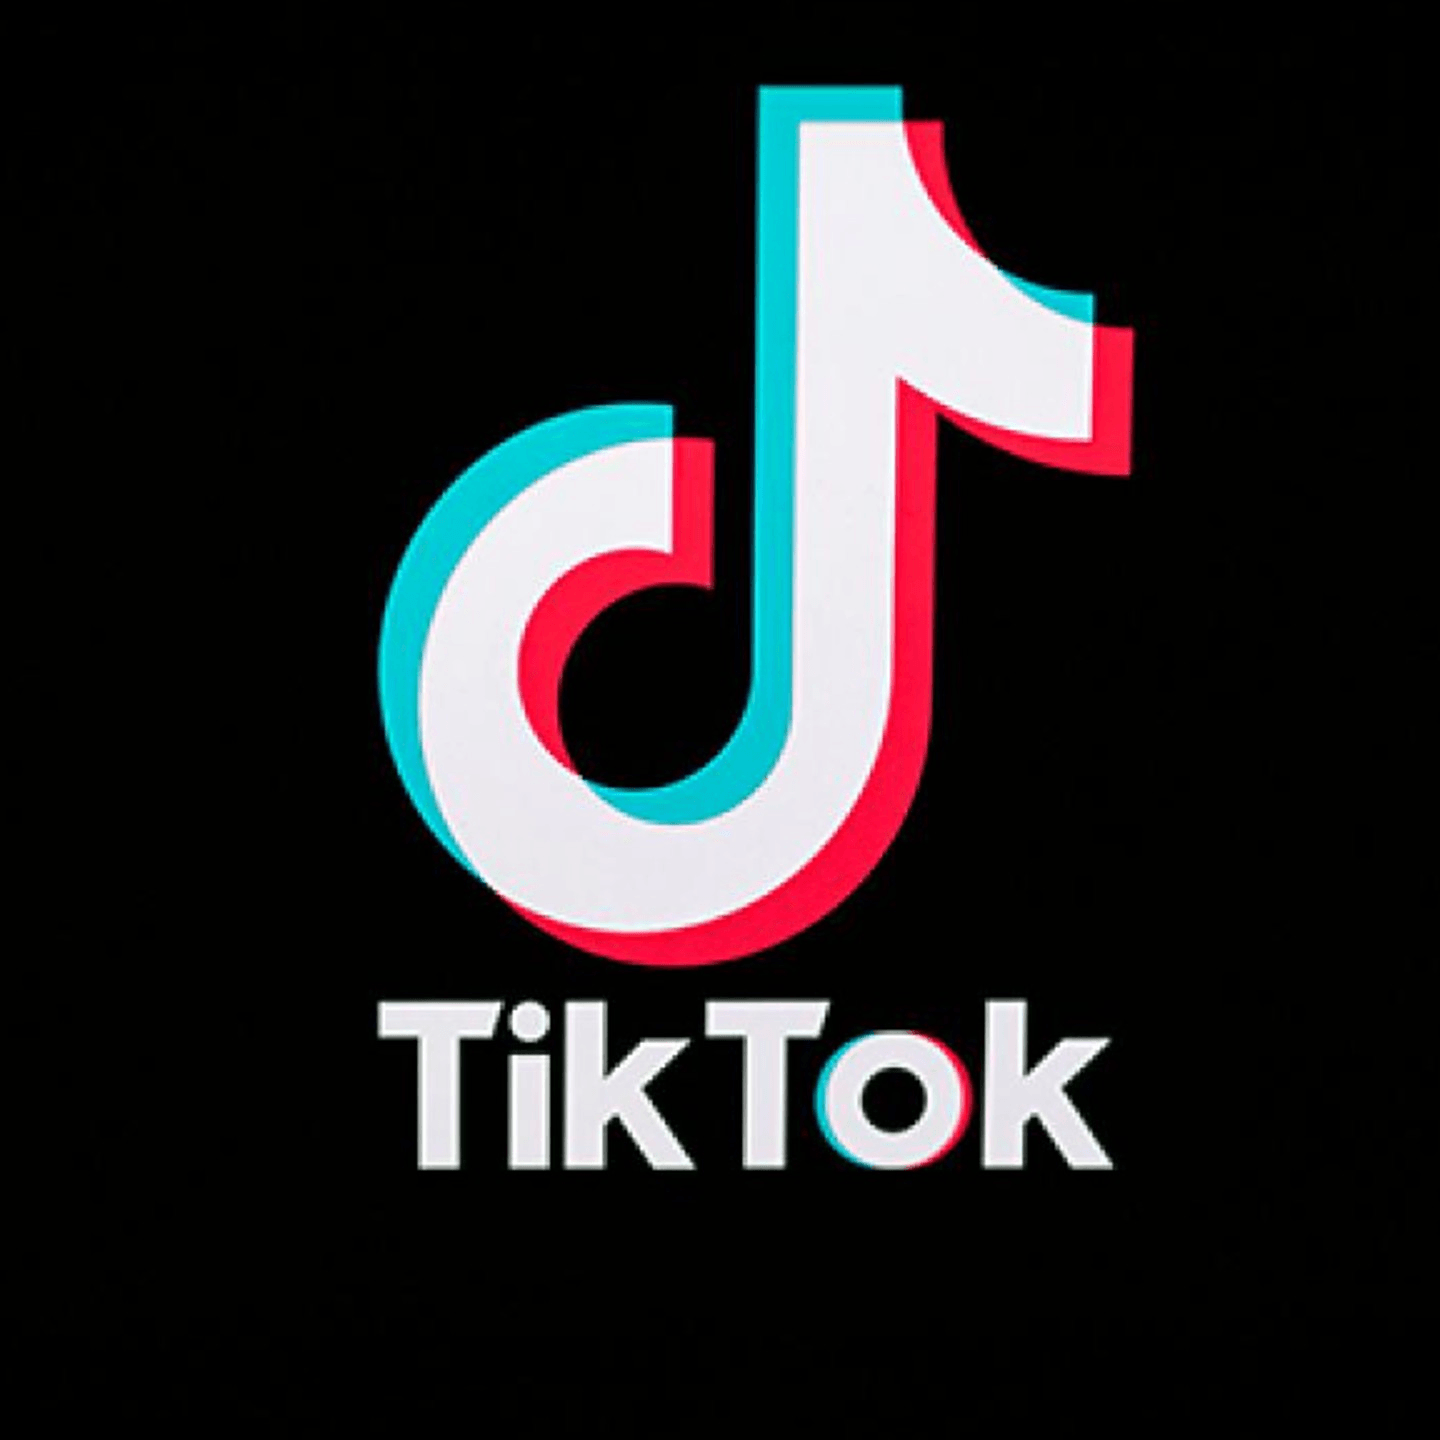 ¡Don't forget to follow us on TikTok!